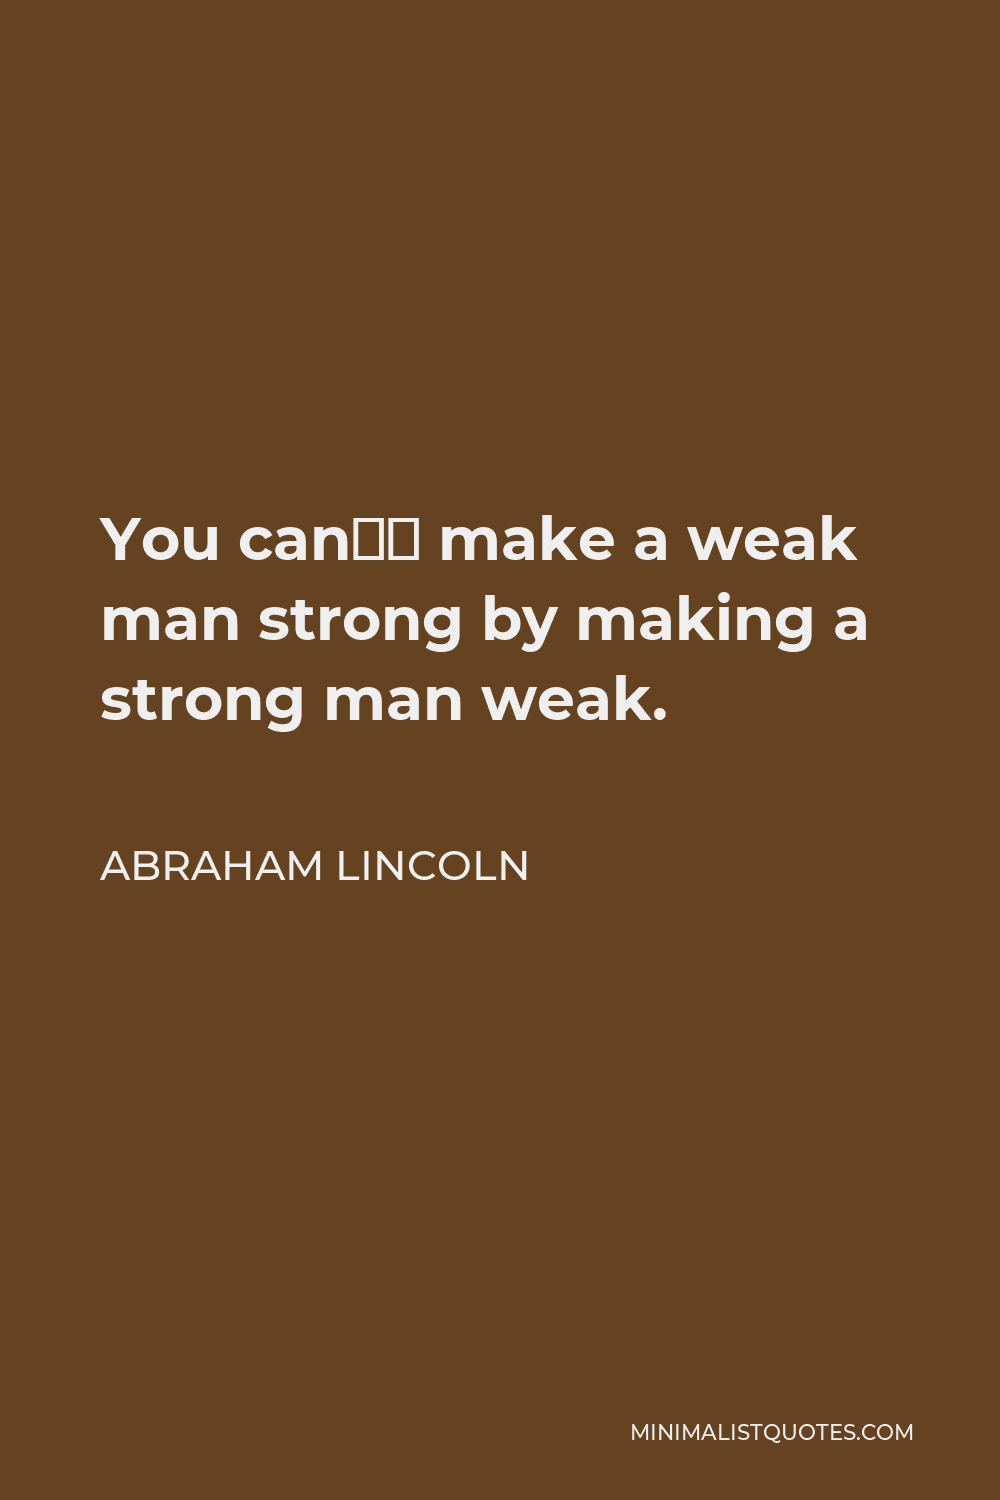 Abraham Lincoln Quote - You can’t make a weak man strong by making a strong man weak.